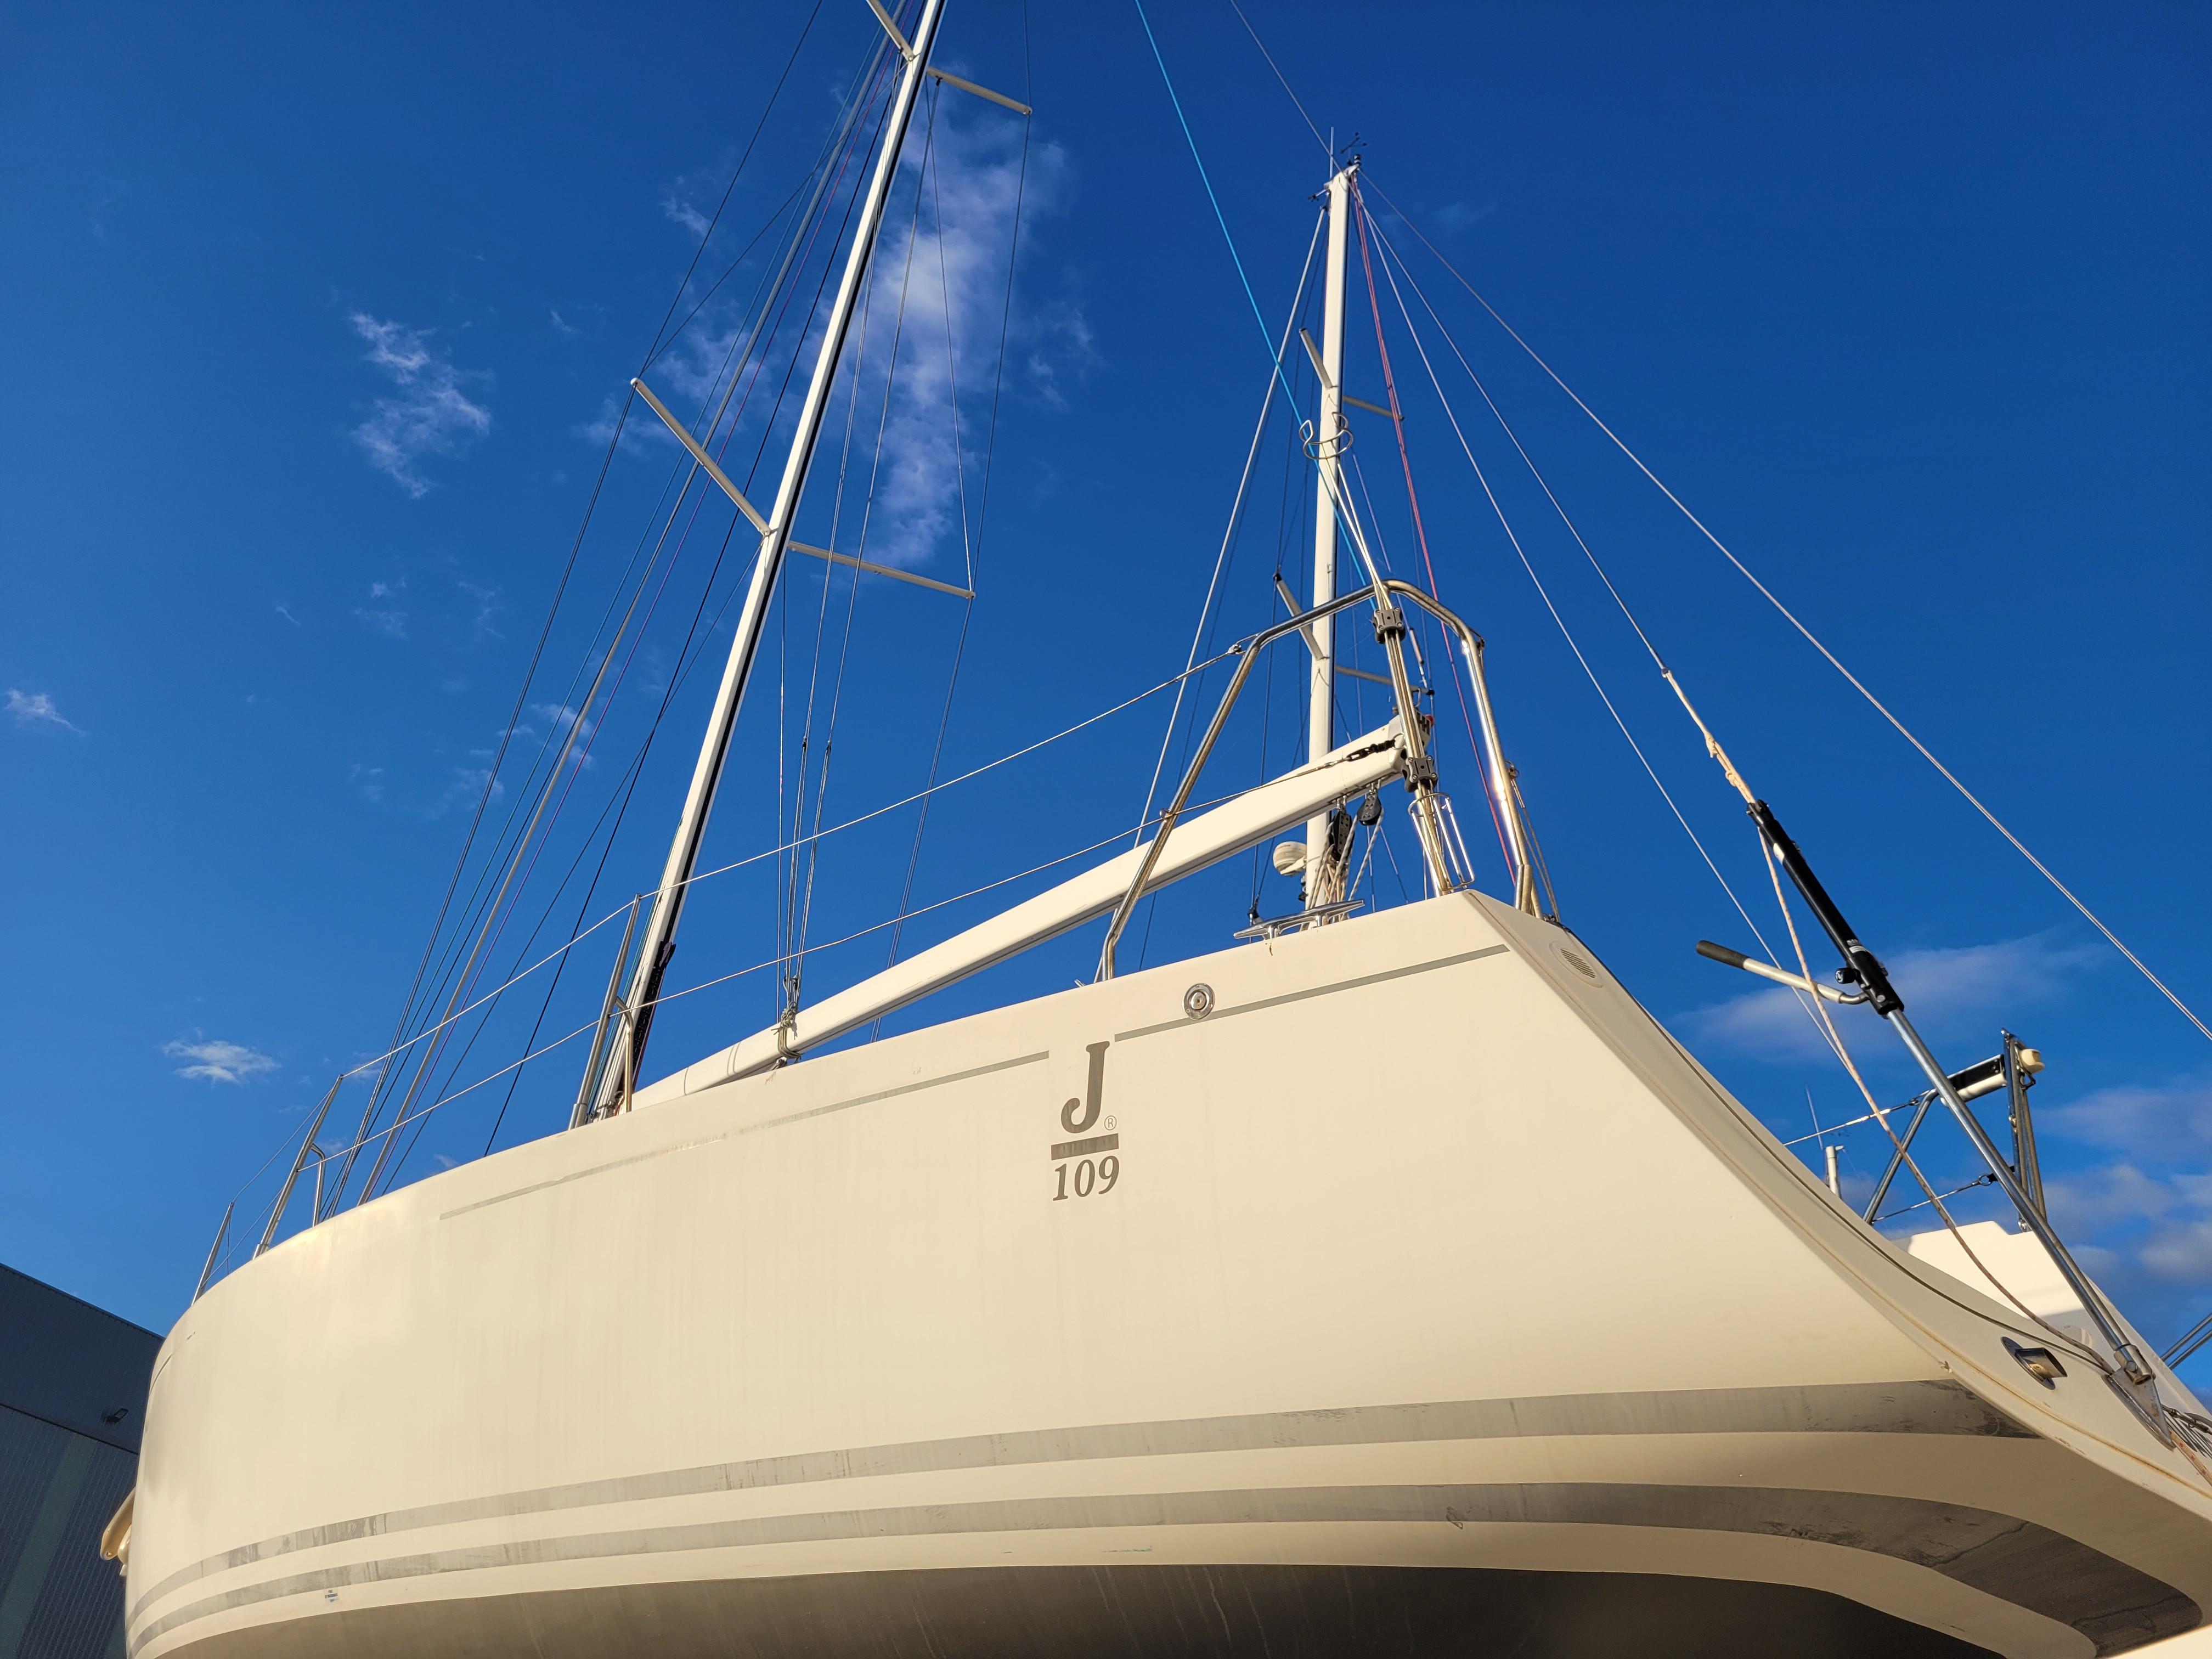 j109 yacht for sale